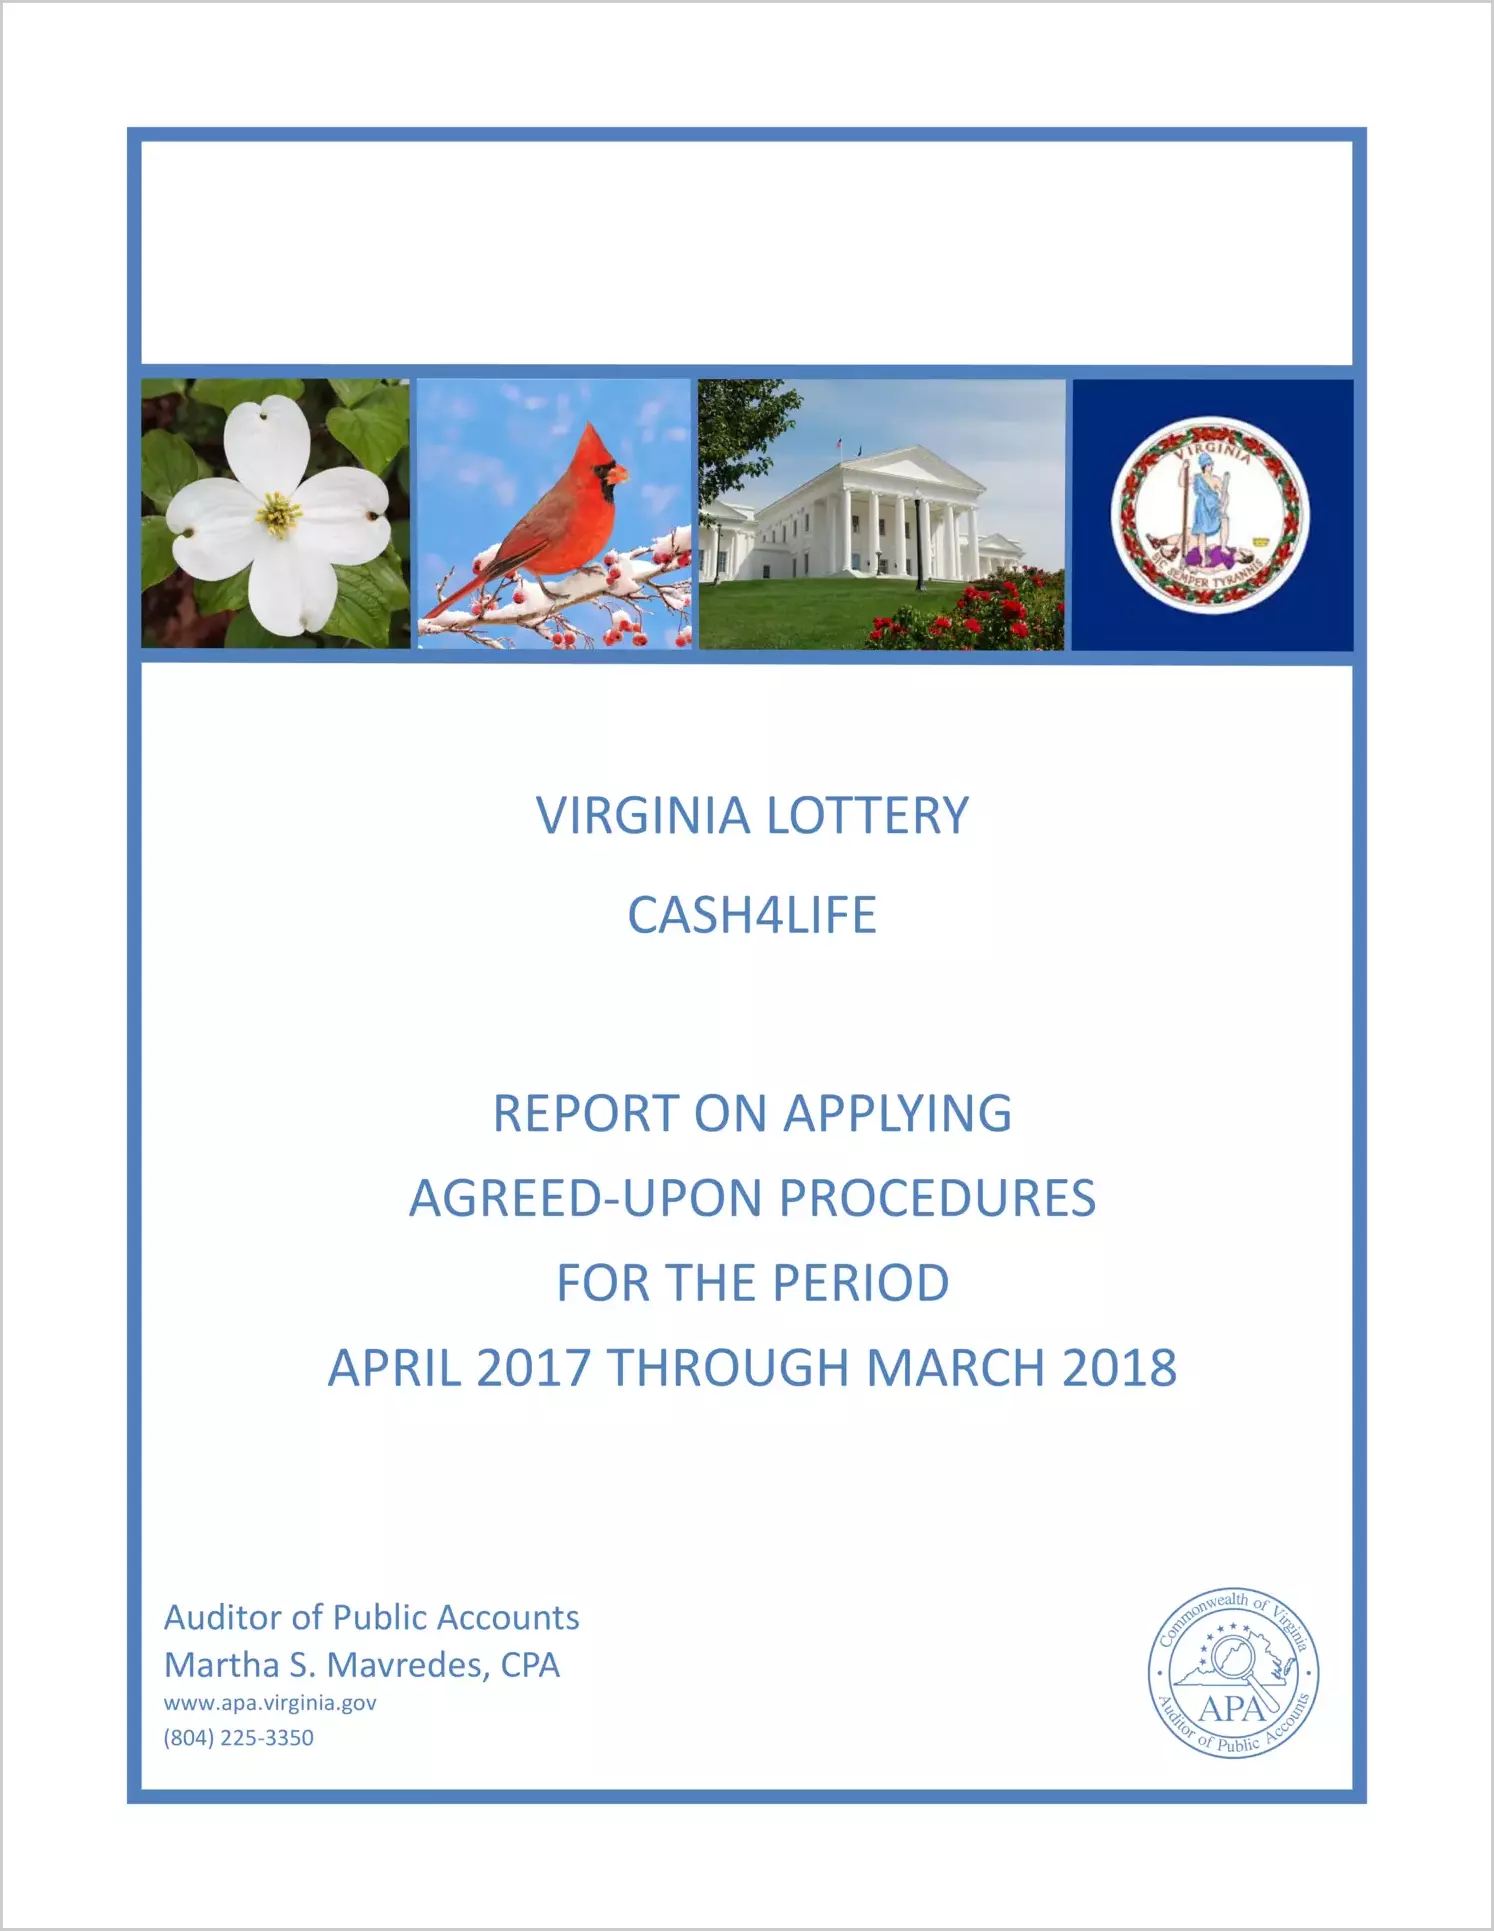 VA Lottery Cash4Life report on Applying Agreed-Upon Procedures for the period April 2017 through March 2018